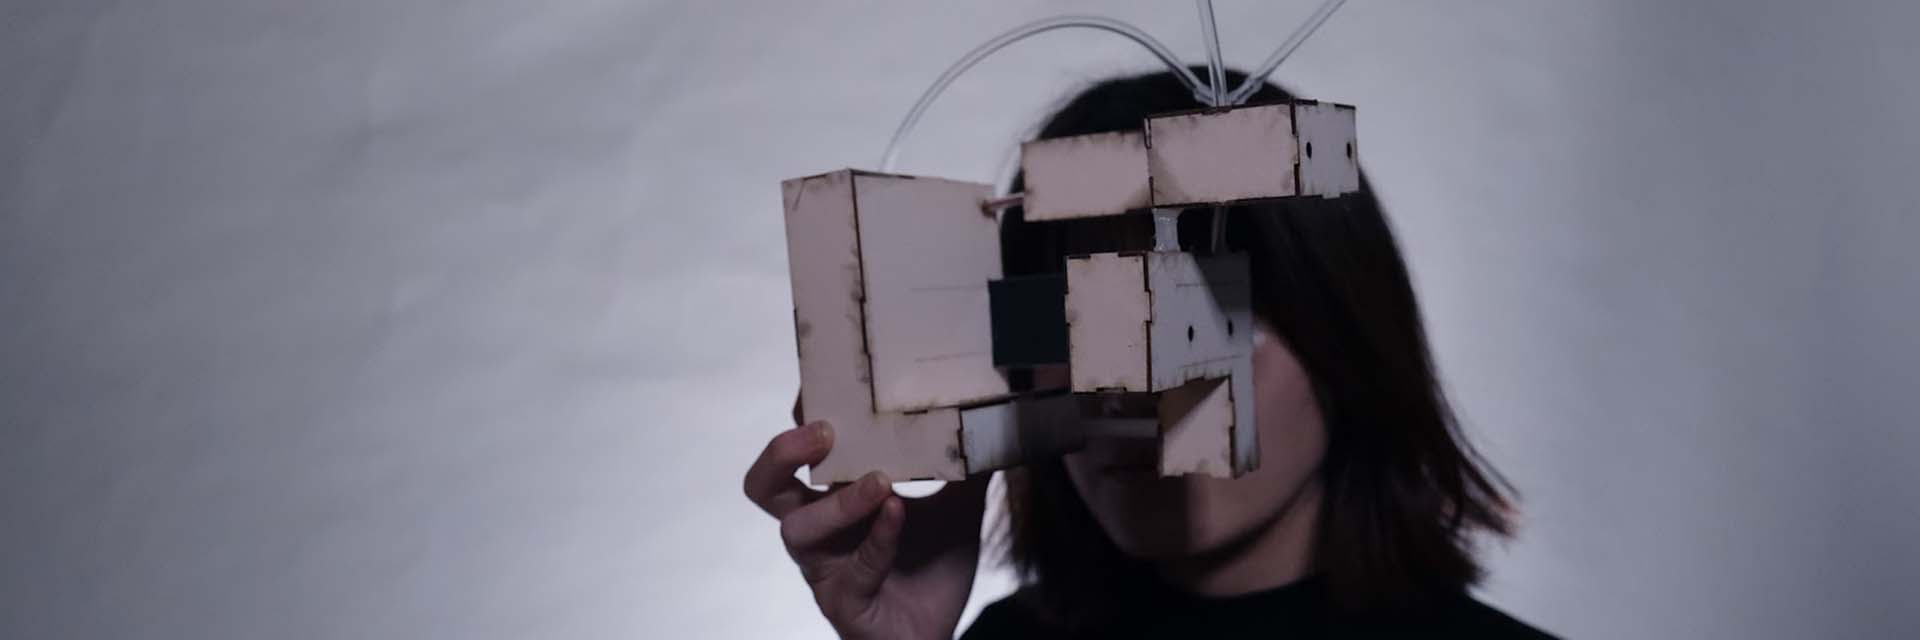 Person holding the device made of a series of boxes and tubes to their face